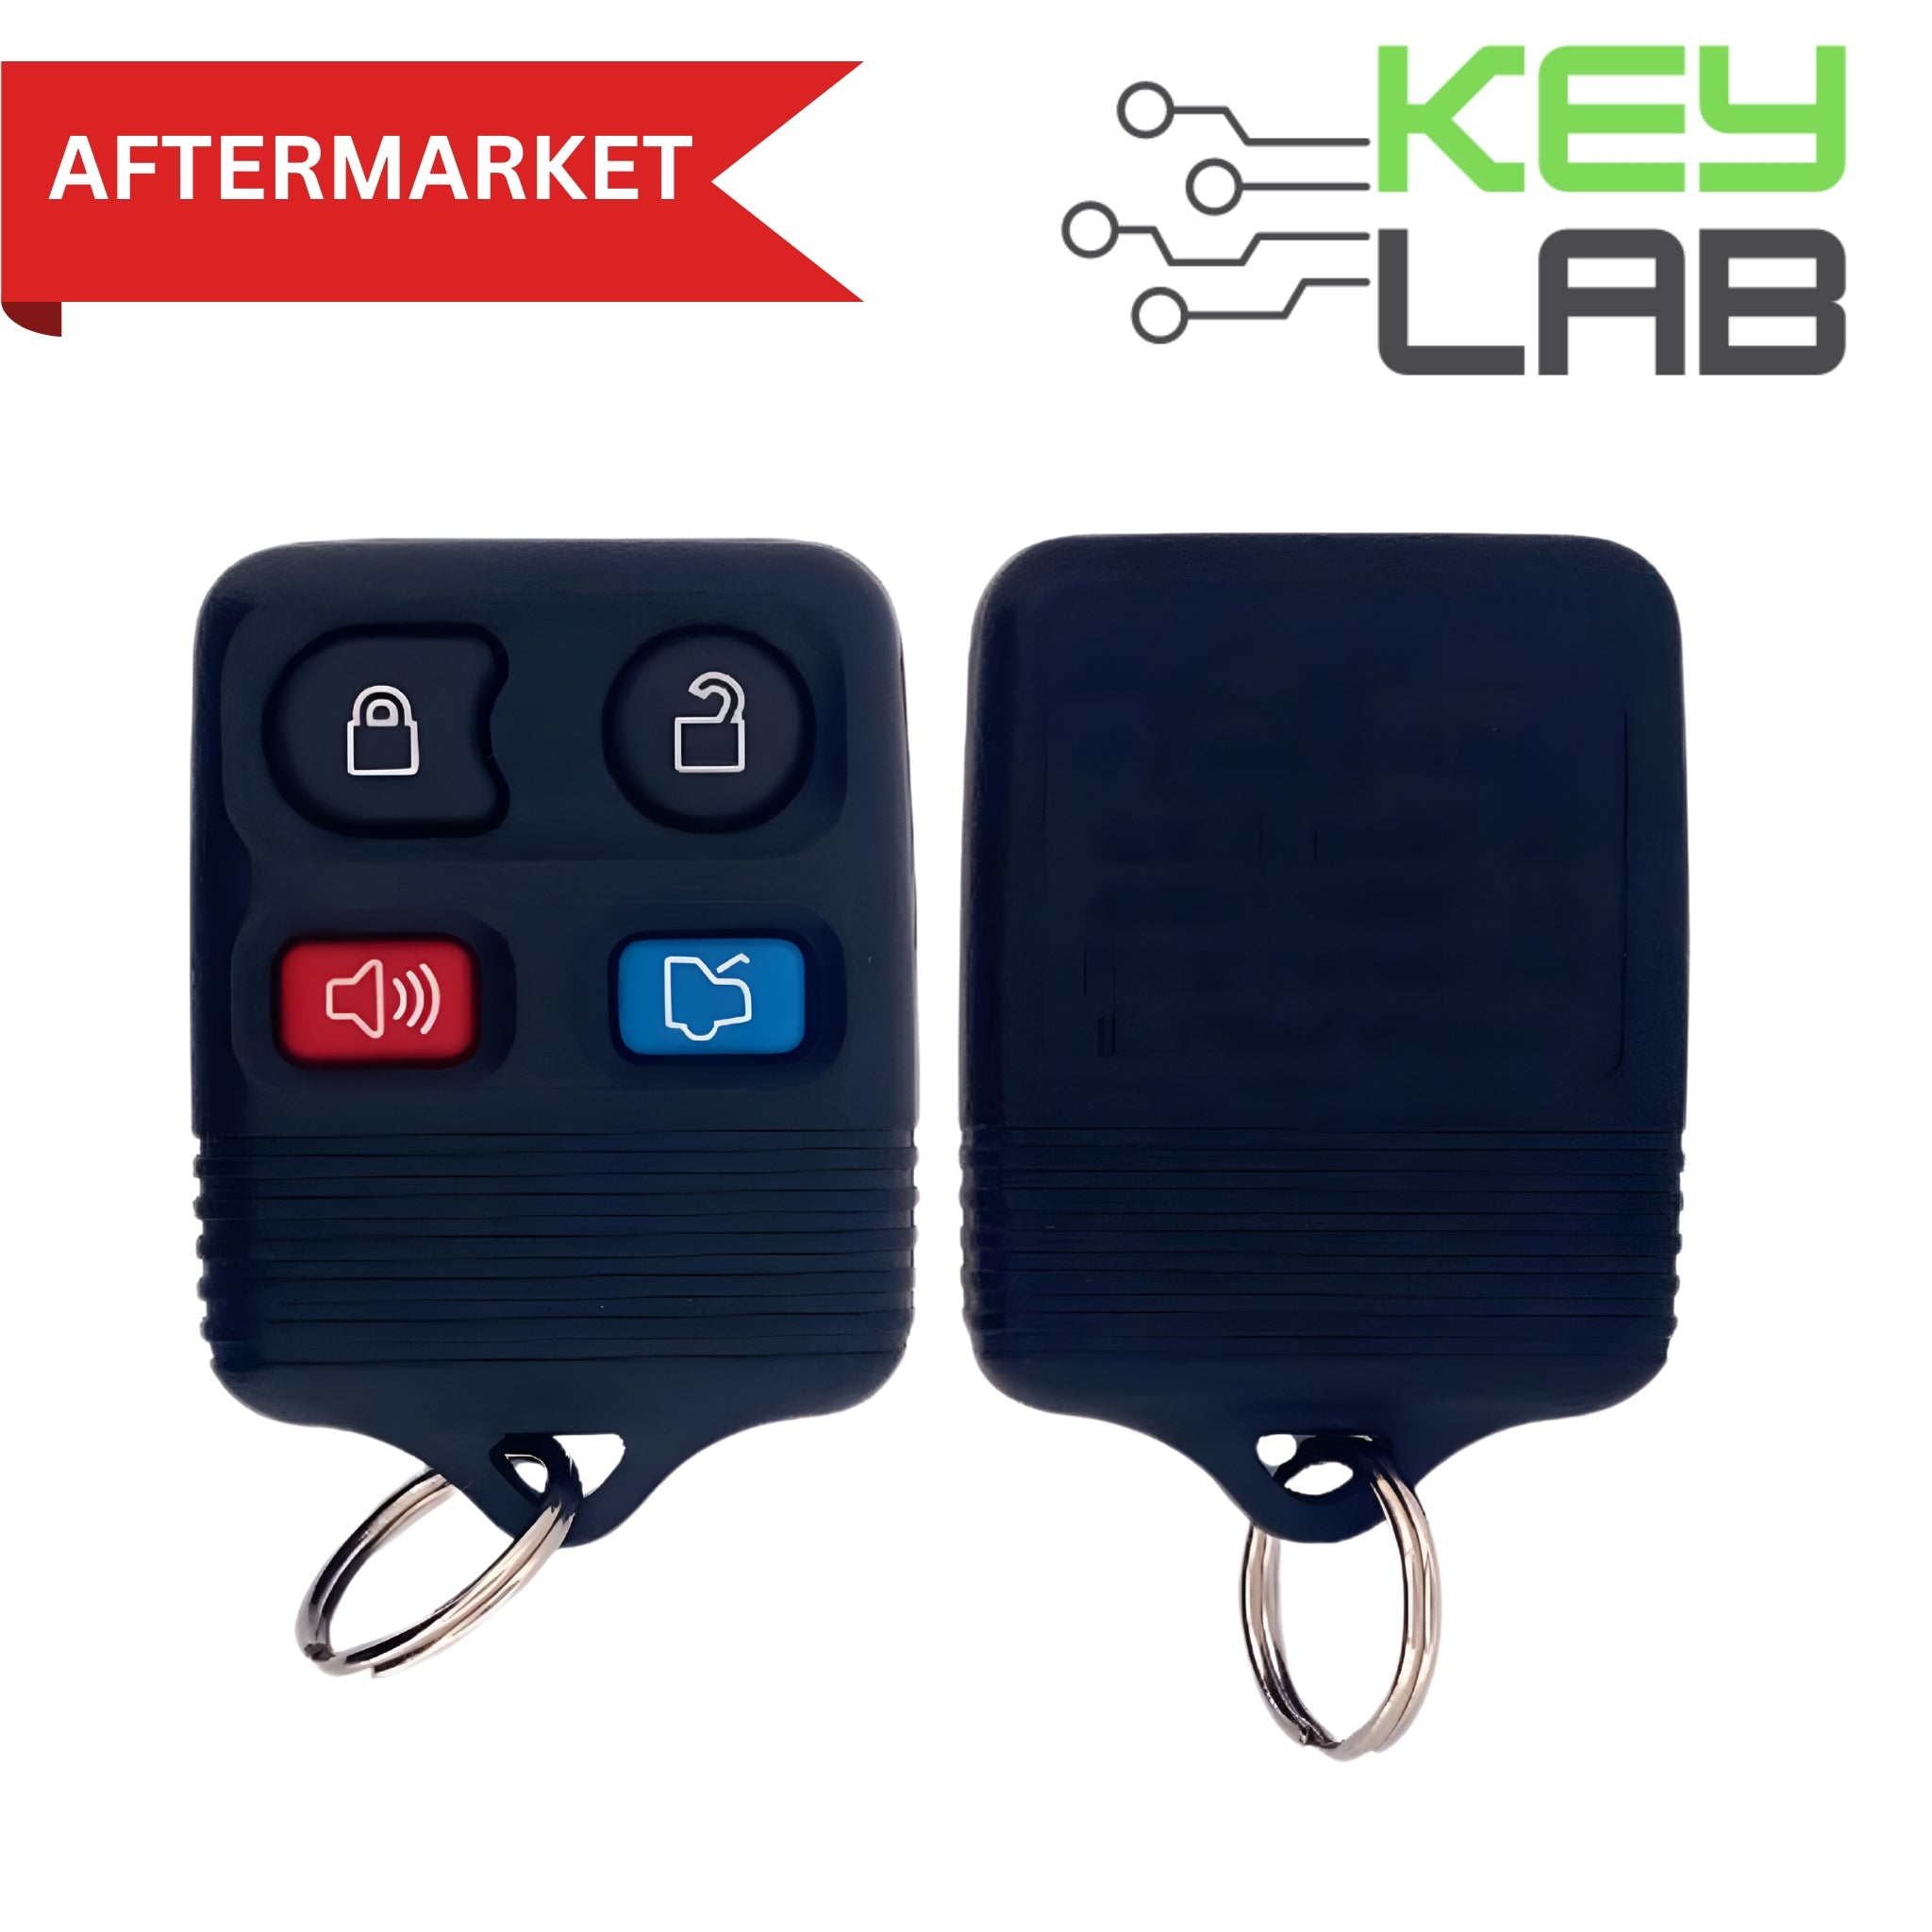 Ford Aftermarket 1998-2014 Explorer, Escape, Focus, Taurus, Mustang Keyless Entry Remote 4B Trunk FCCID: CWTWB1U331 PN# 2S4T-15K601-AB, 8S4T-15K601-AB, 8S4Z-15K601-AA